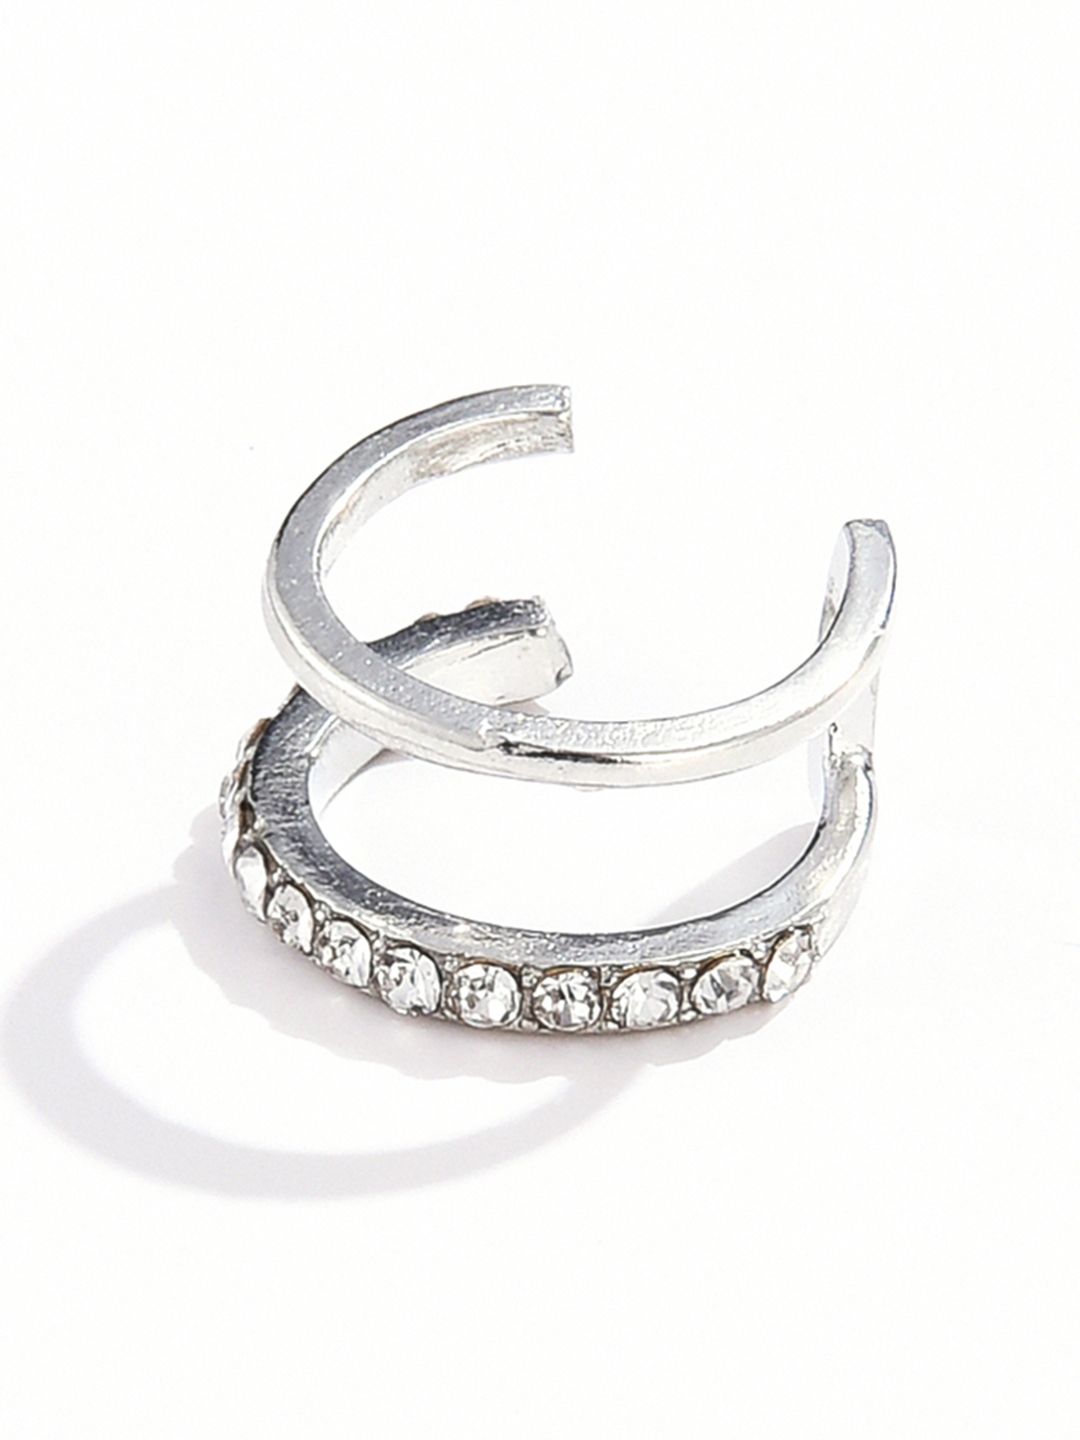 URBANIC Silver-Toned Crescent Shaped Ear Cuff Earrings Price in India